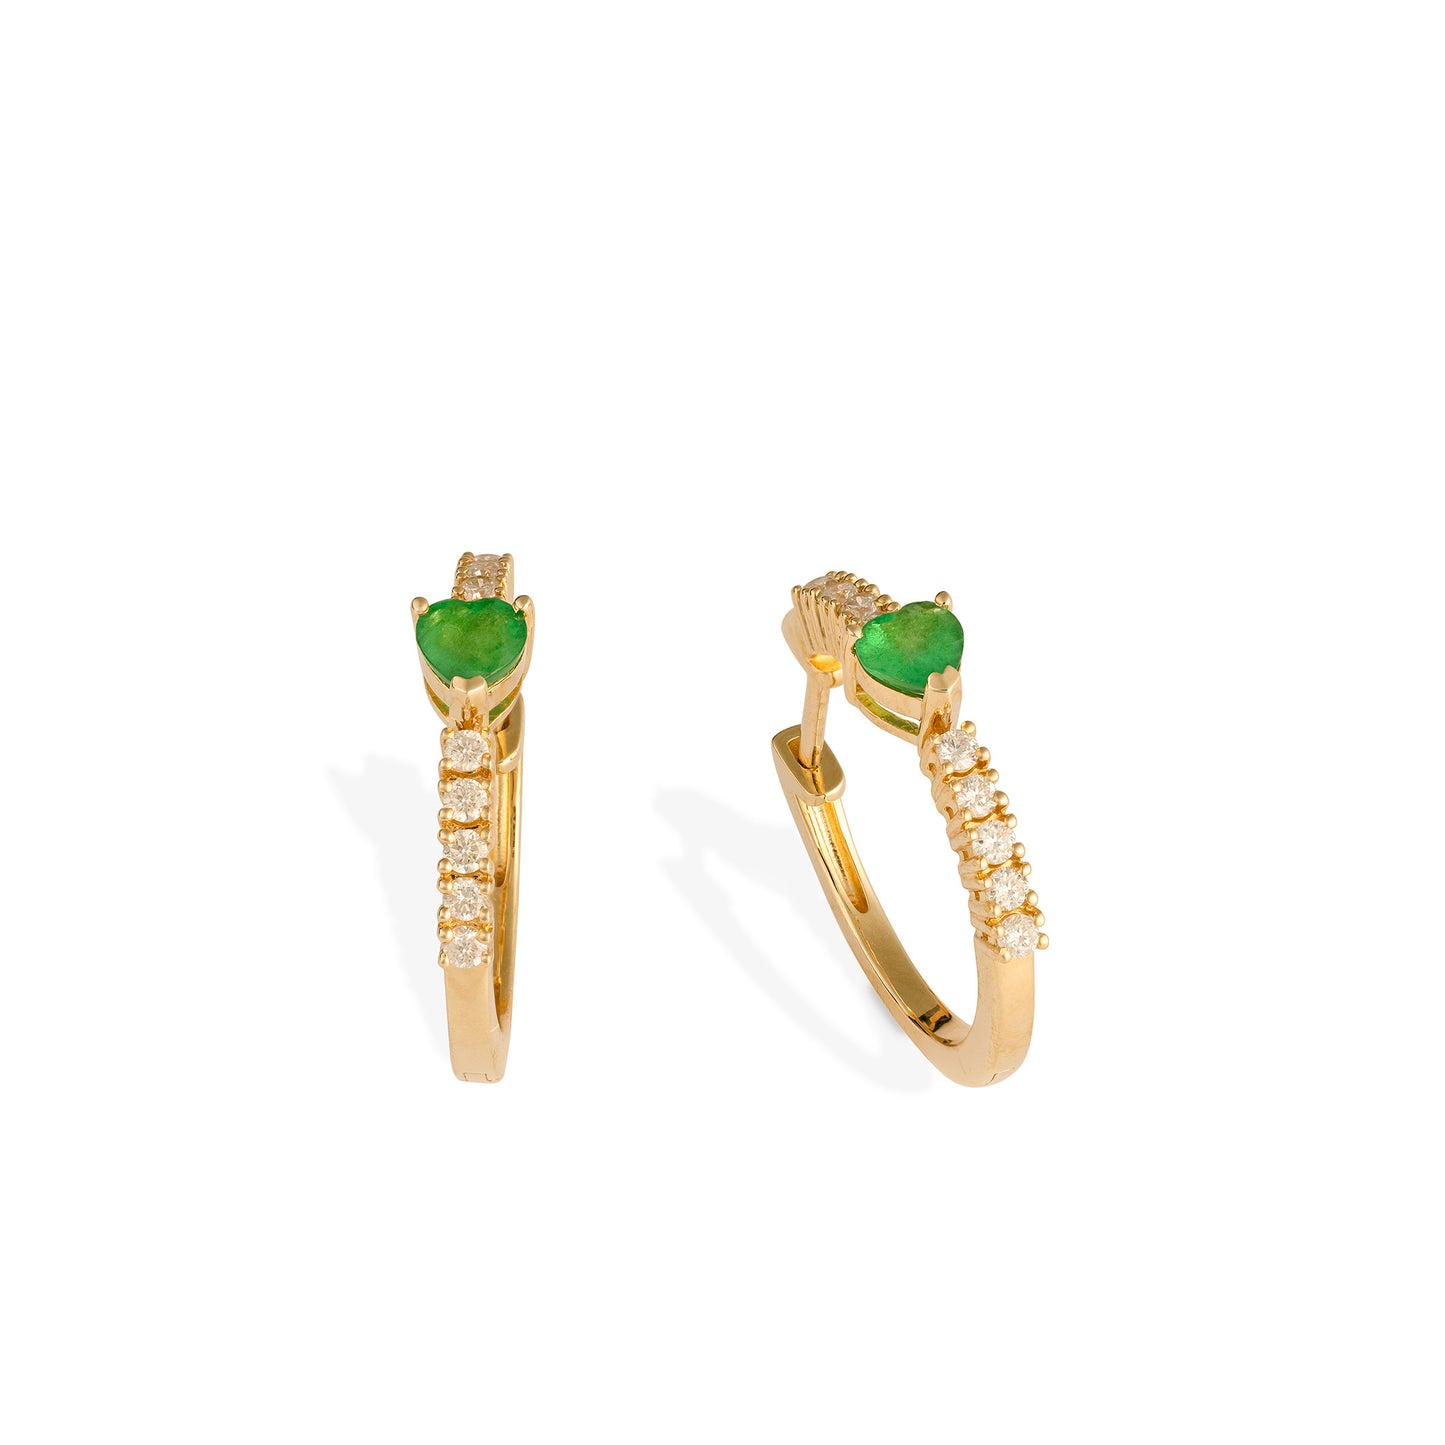 The Seven Diamond and Emerald Heart Hoops